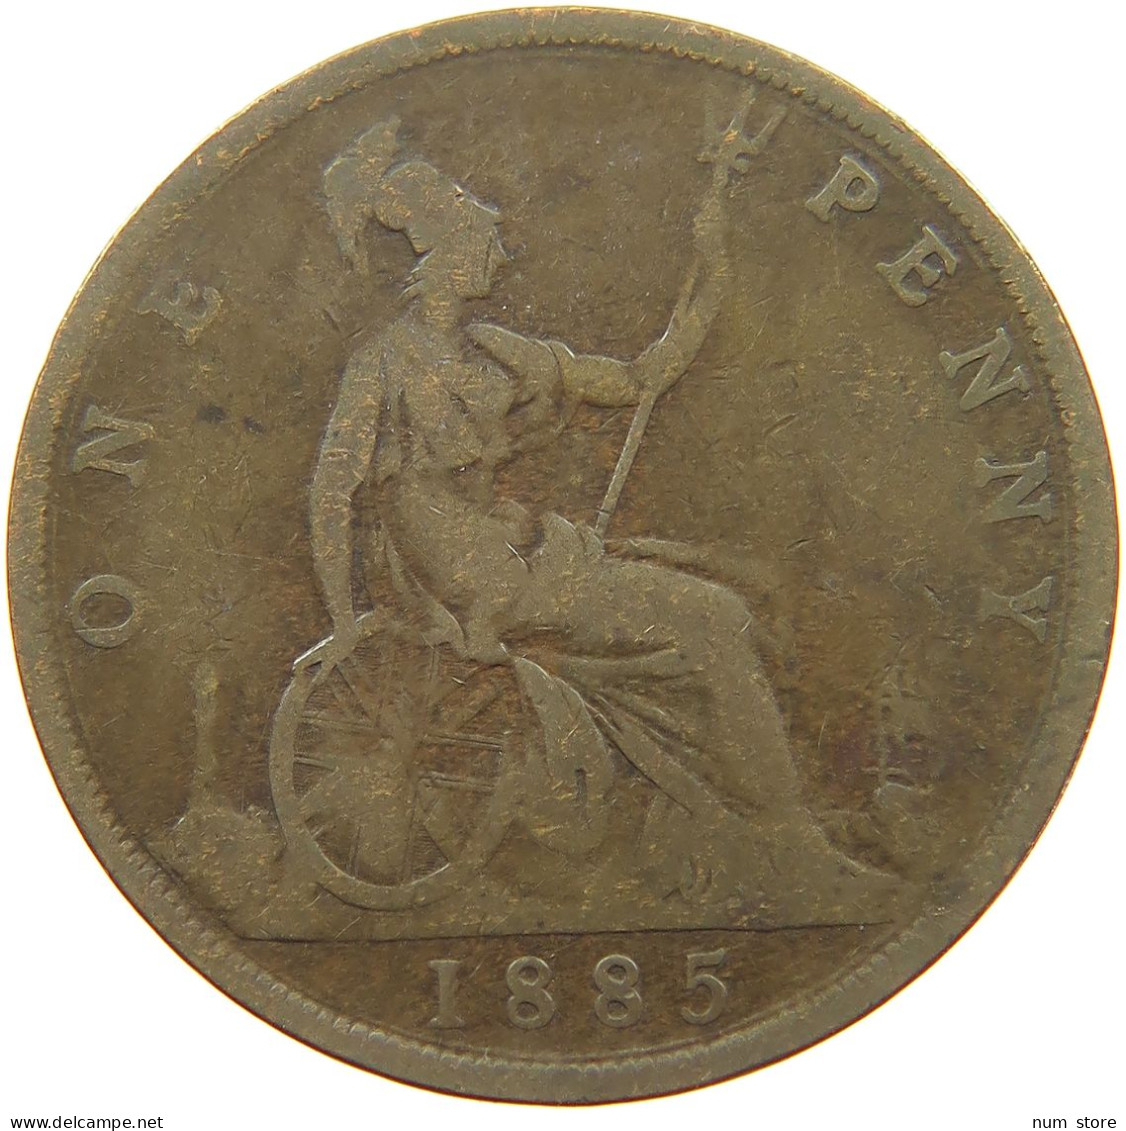 GREAT BRITAIN PENNY 1885 Victoria 1837-1901 #a058 0047 - D. 1 Penny